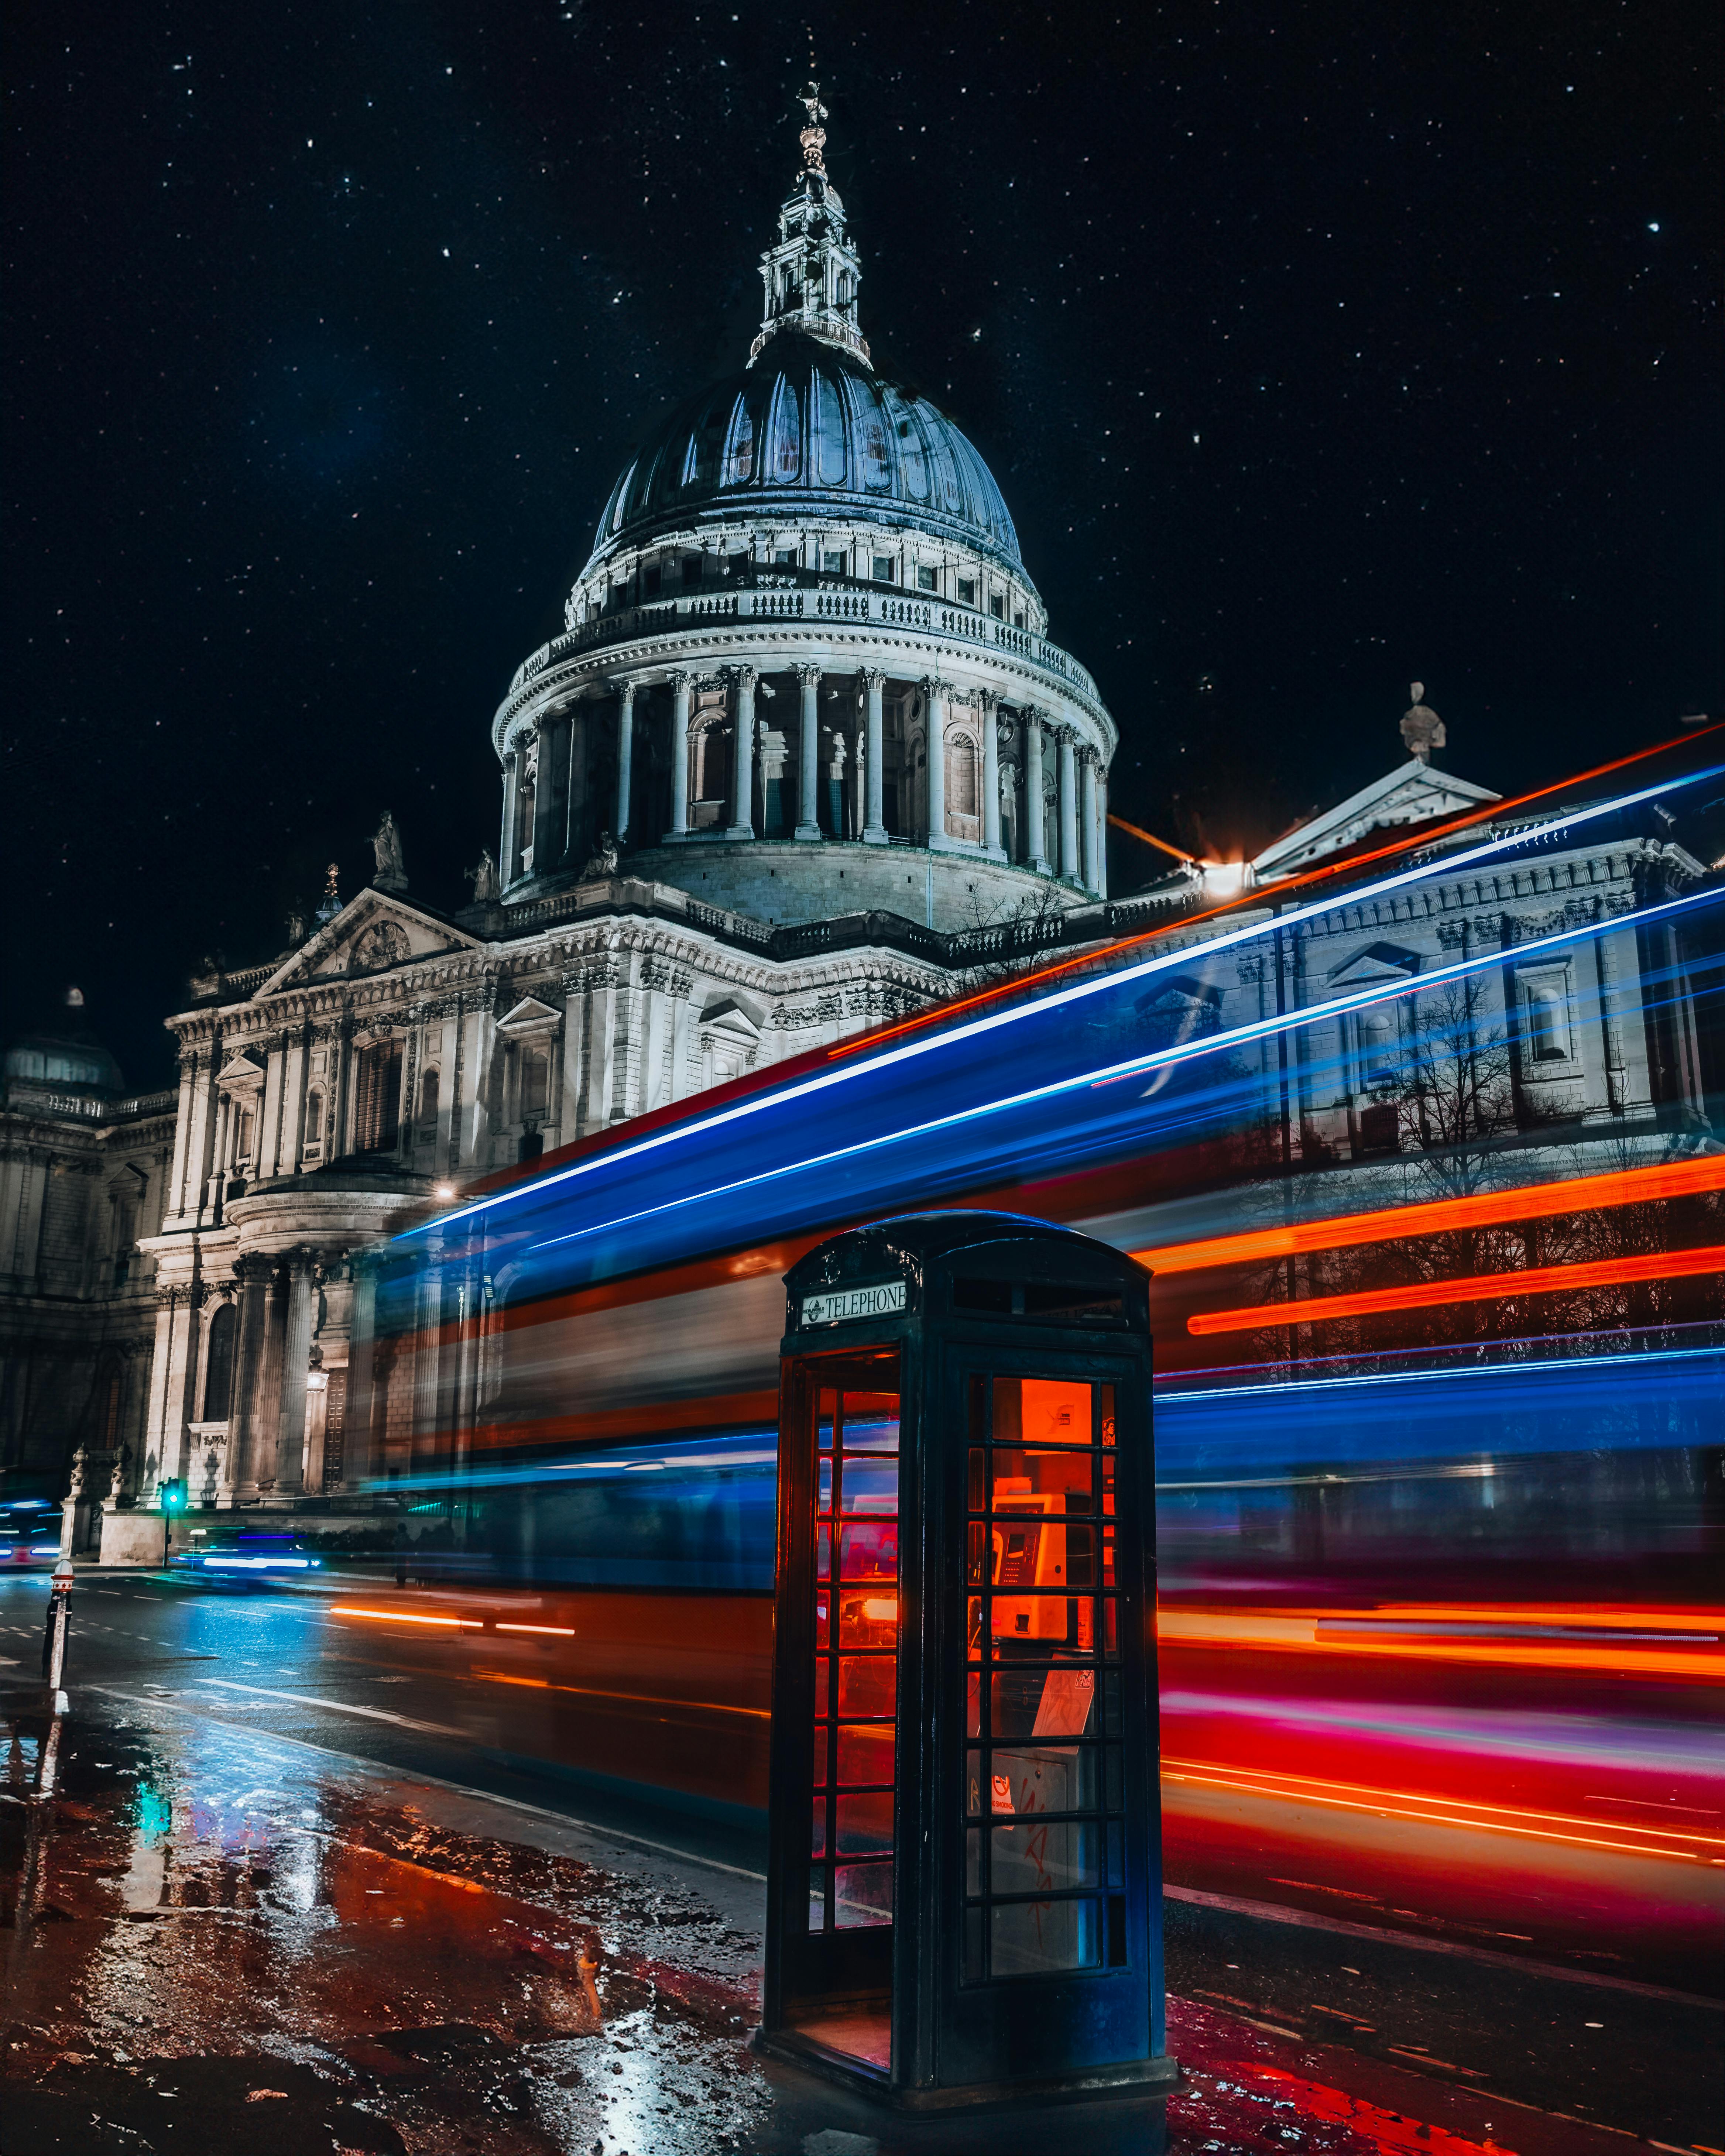 Timelapse of traffic with St. Paul's cathedral in the background